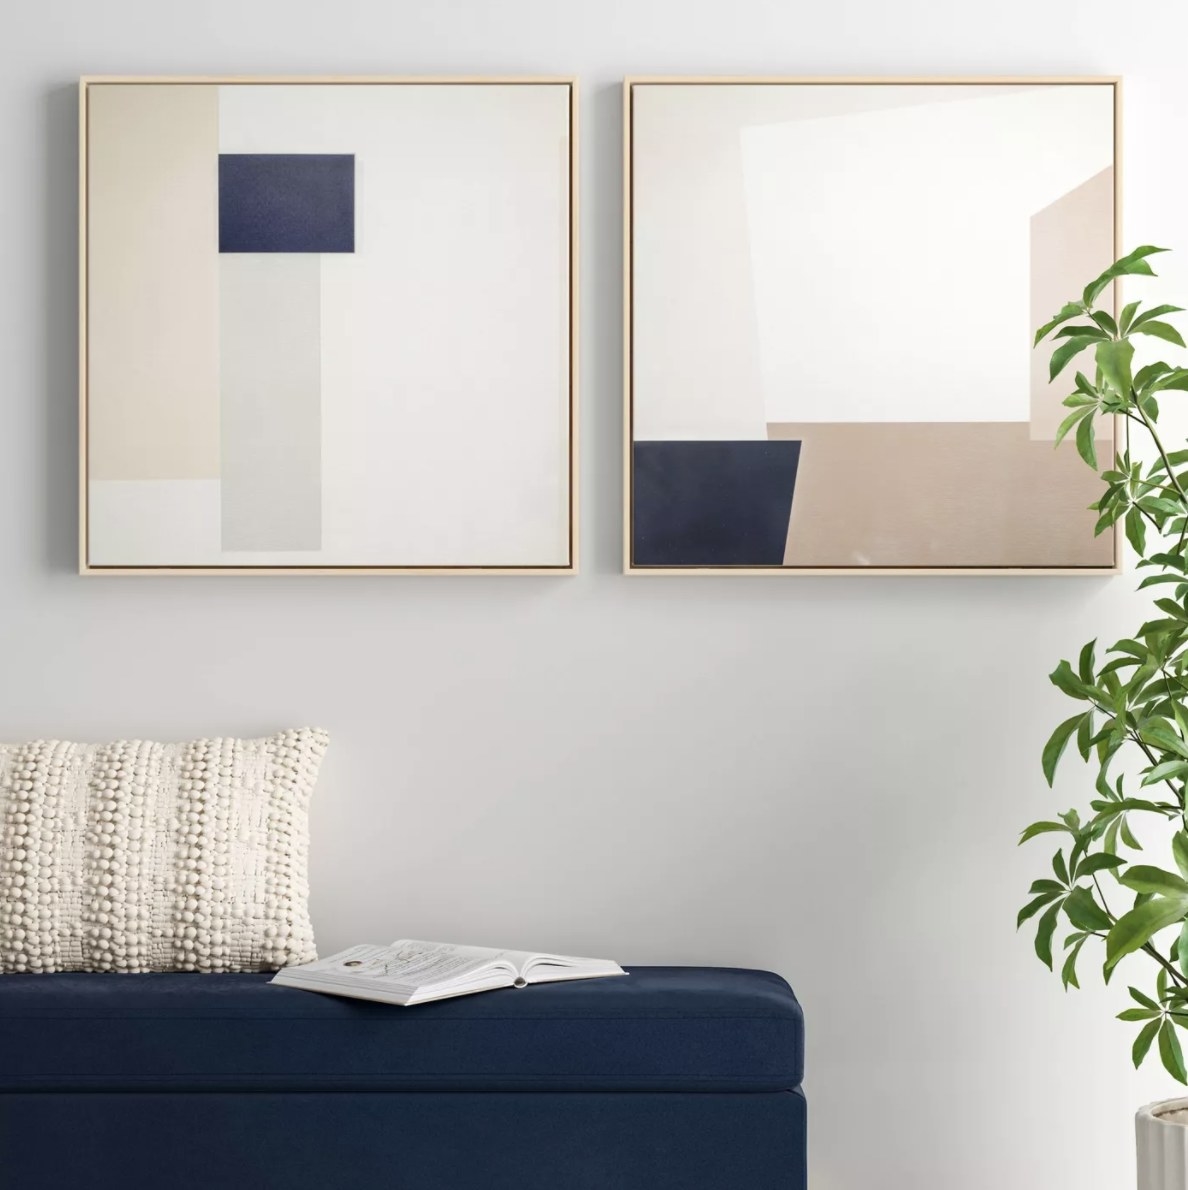 The two painting are square-shaped with tones of light blue, cream, beige and navy